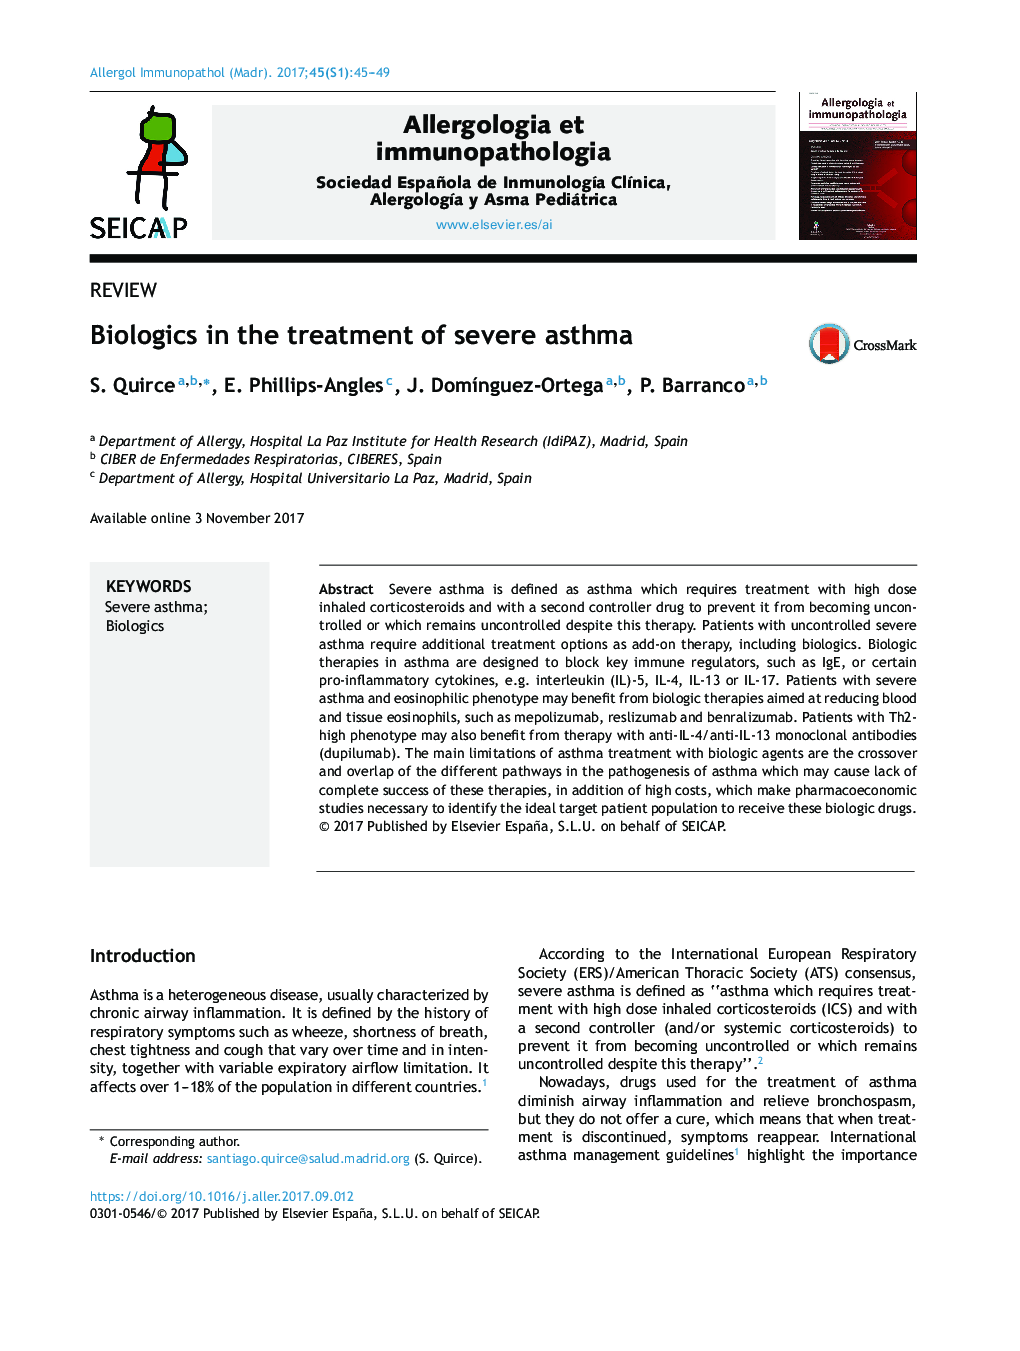 Biologics in the treatment of severe asthma